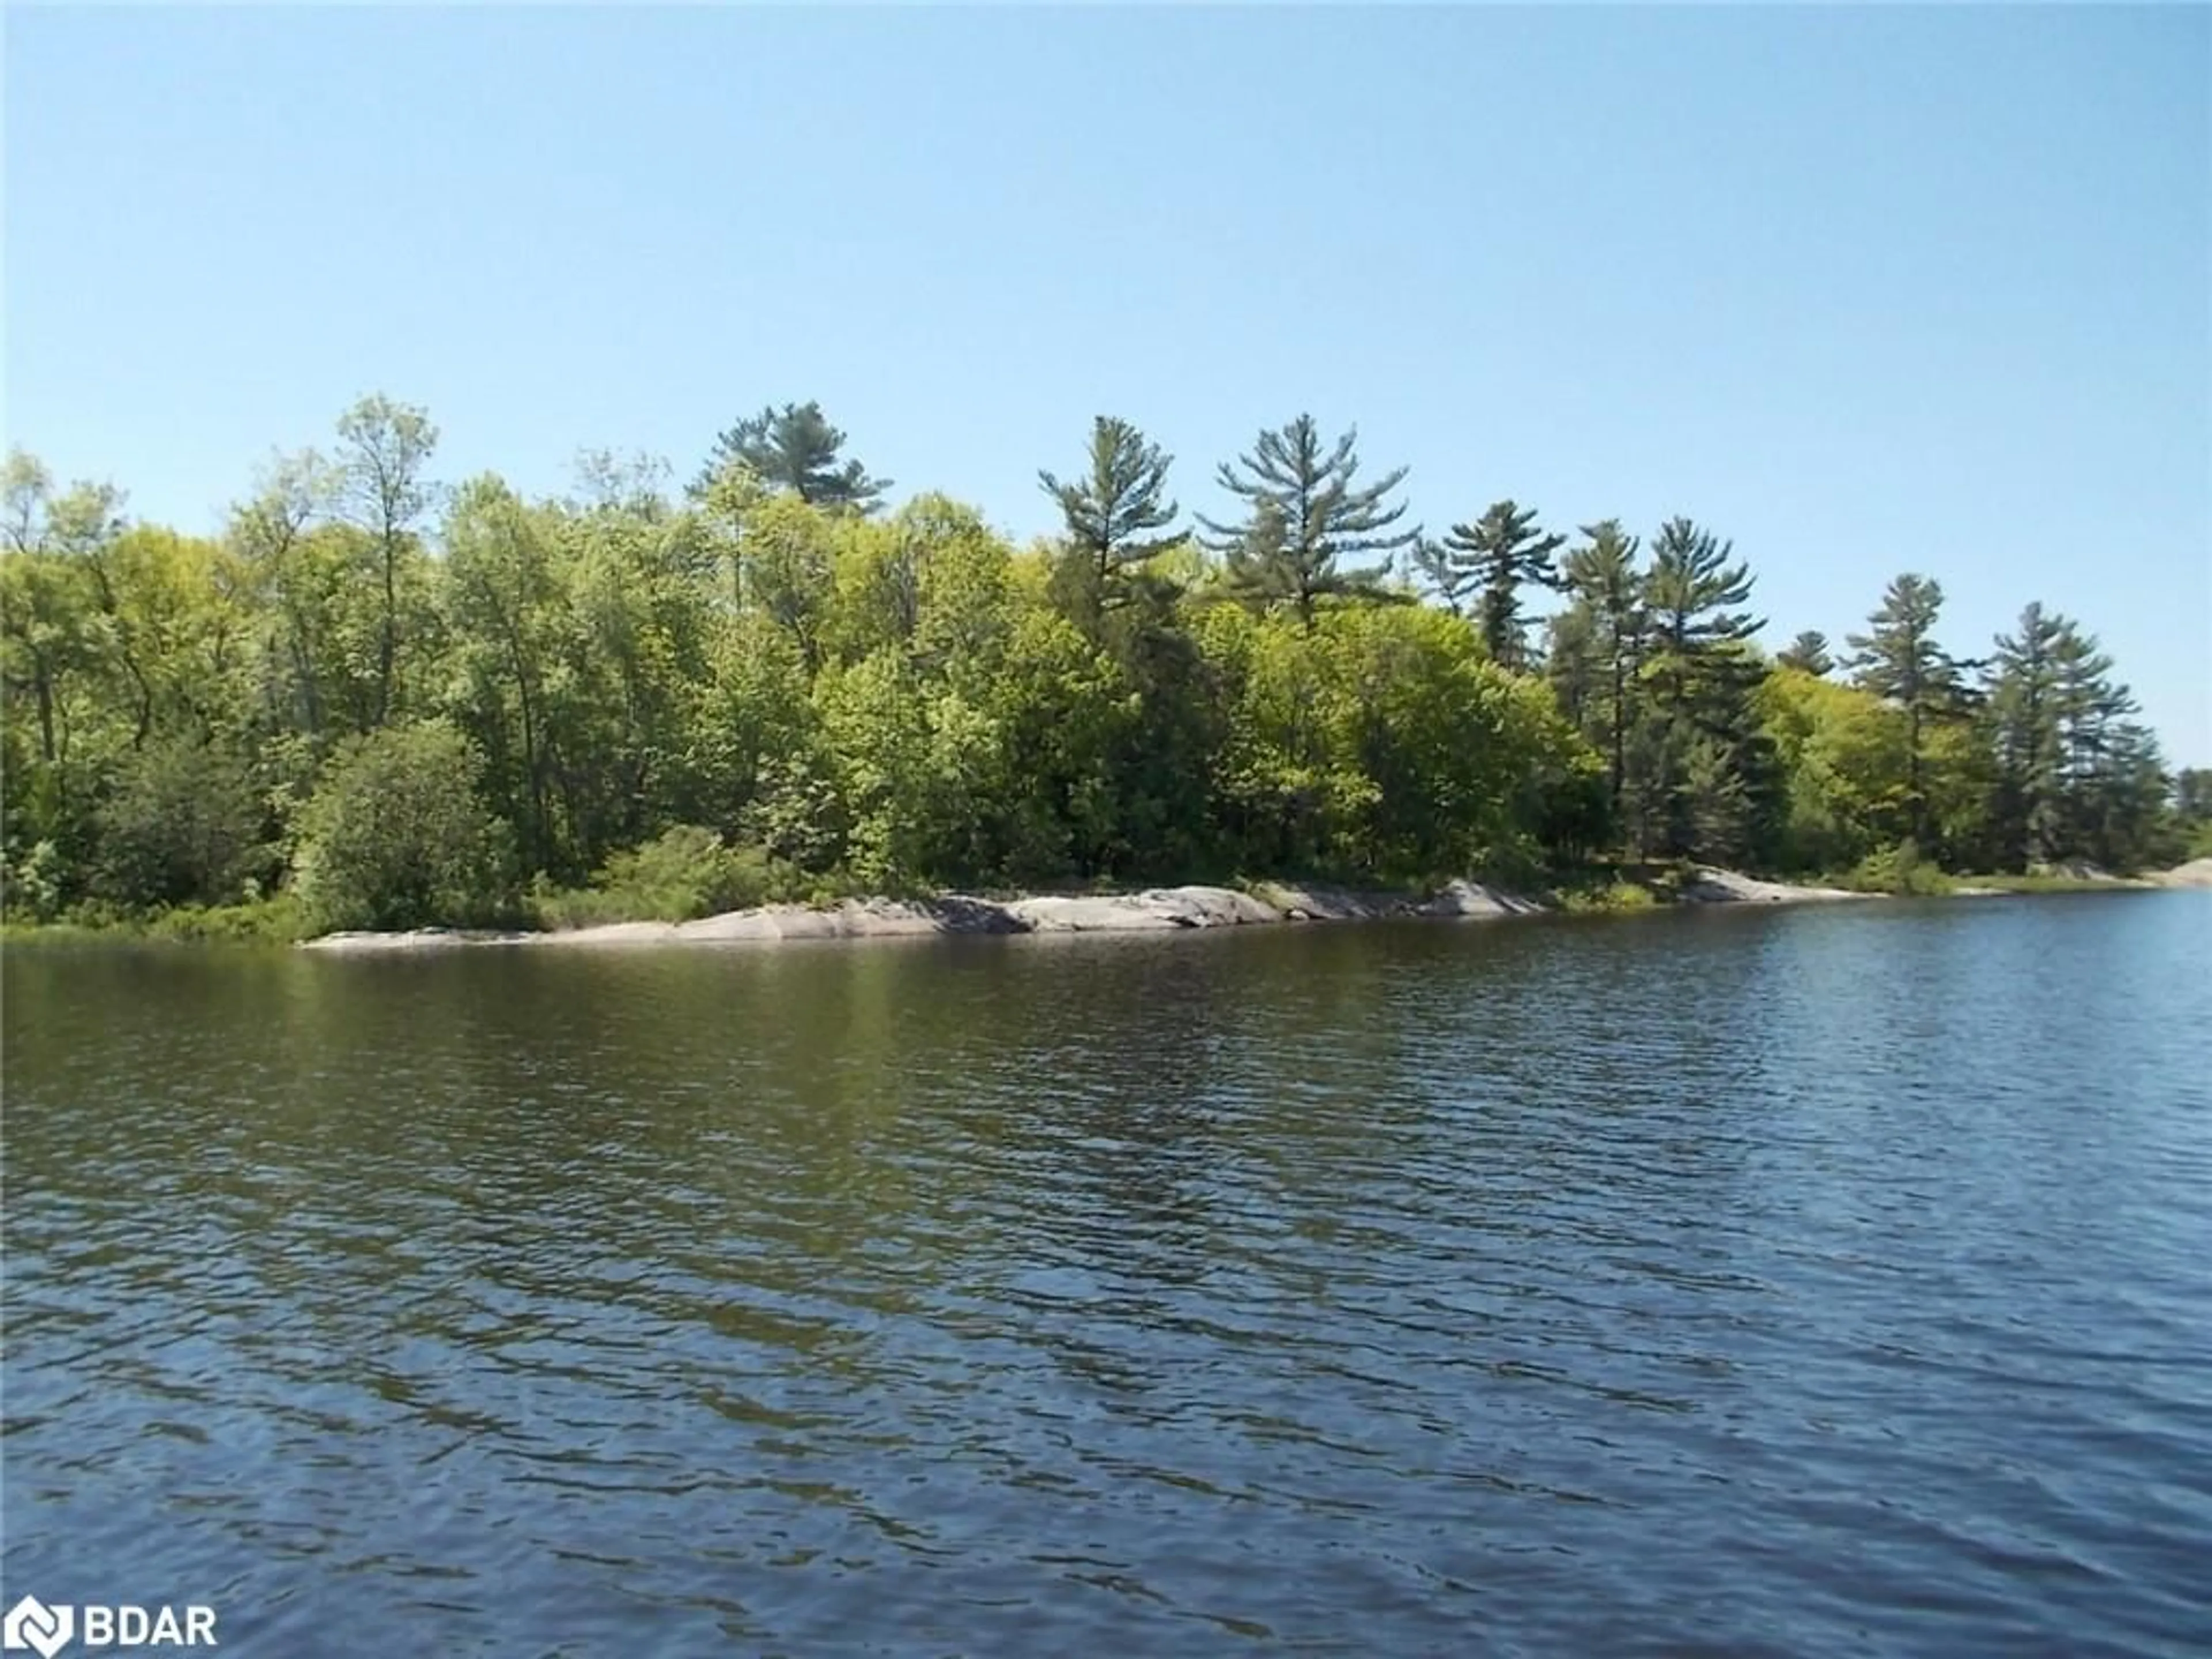 Lakeview for N/A Mcdiarmid Island, Pointe au Baril Ontario P0G 1K0